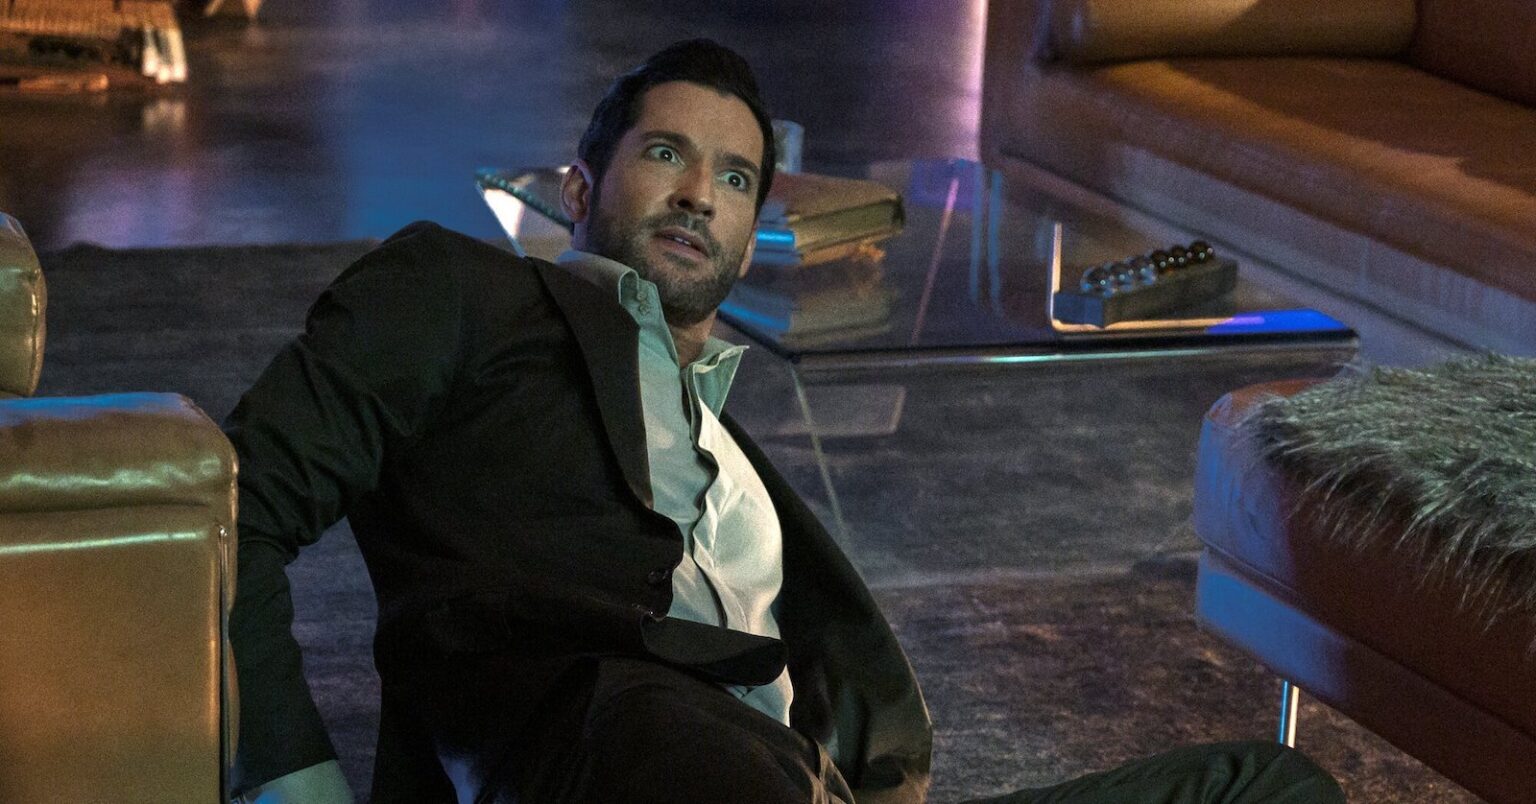 Lucifer season 6 still doesn't have a release date, so fans have to revisit the old episodes to get a fix. Here are some of the best episodes so far.